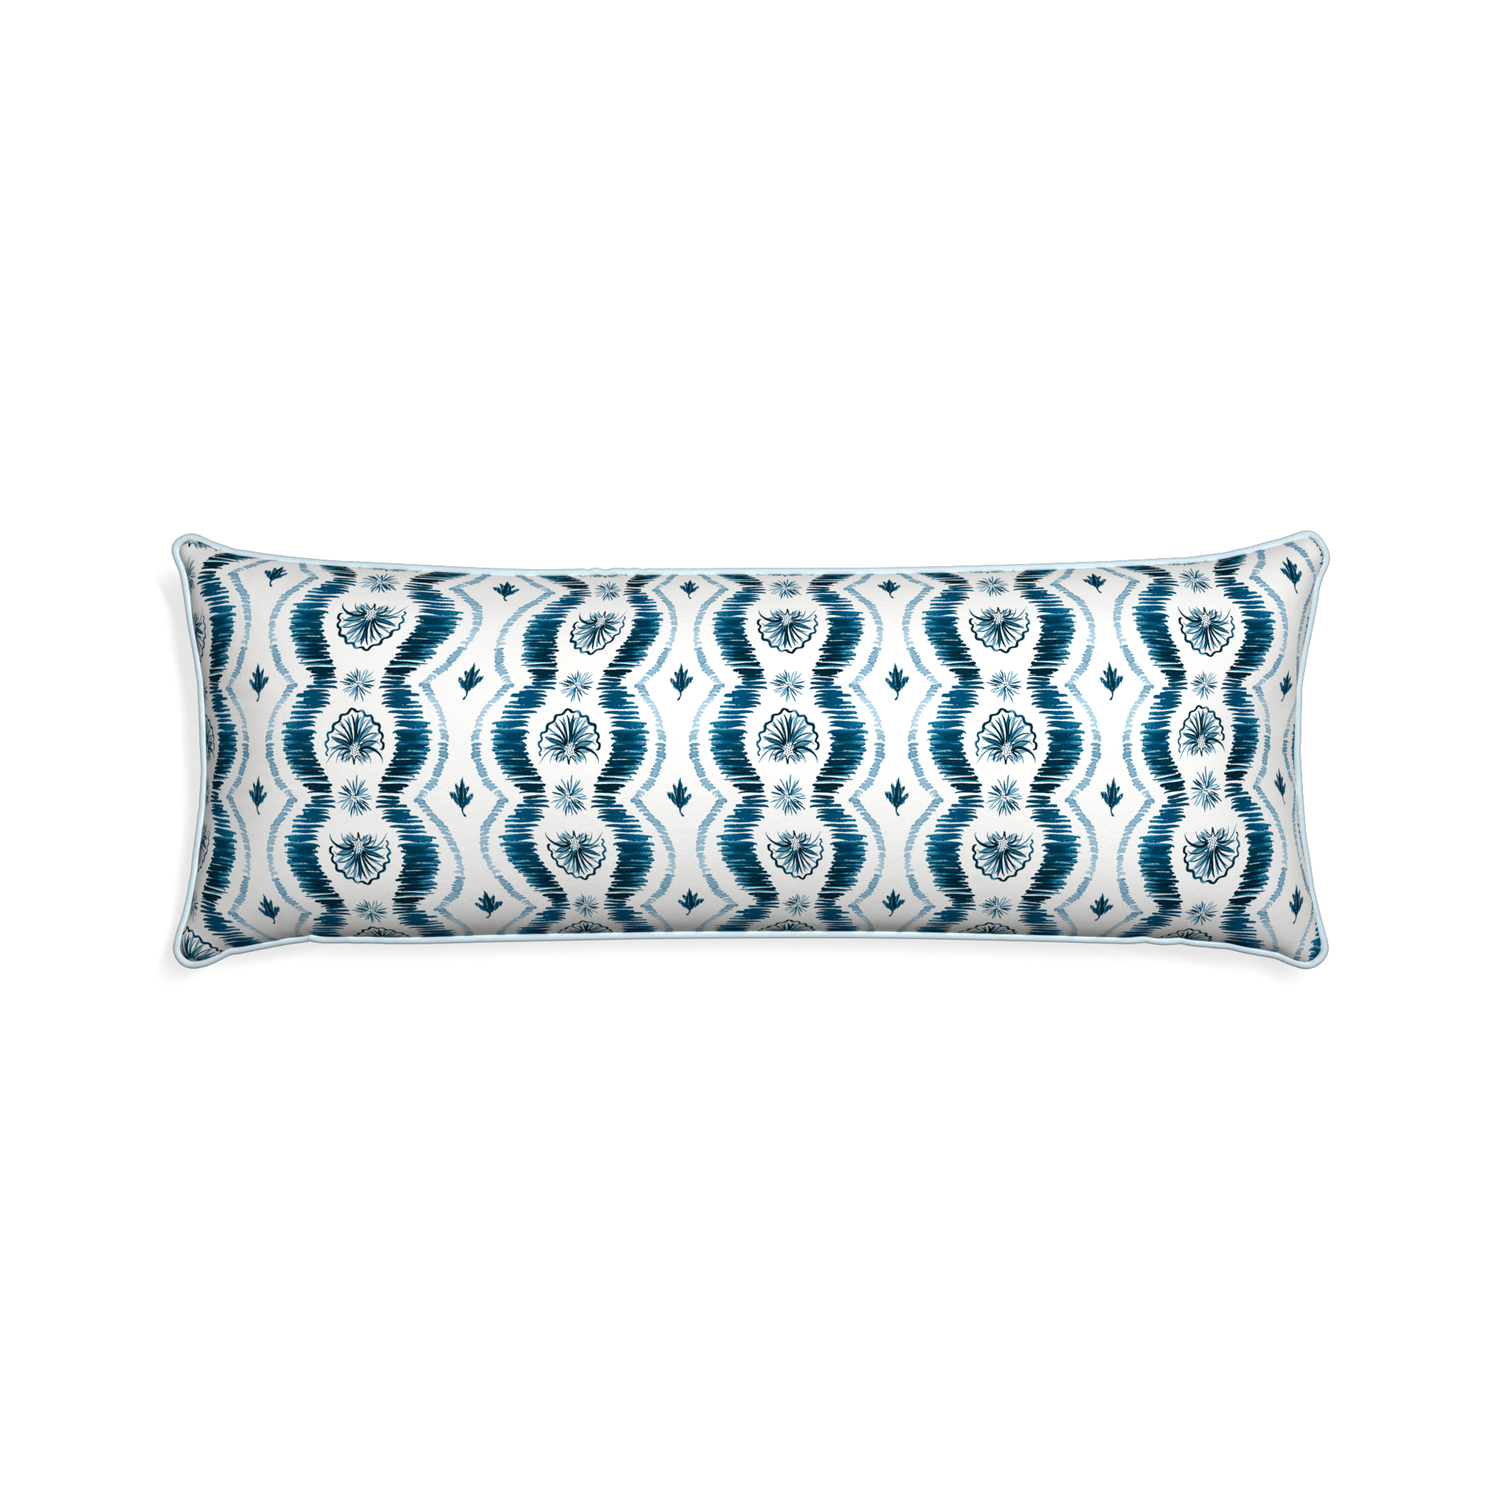 Xl-lumbar alice custom blue ikatpillow with powder piping on white background